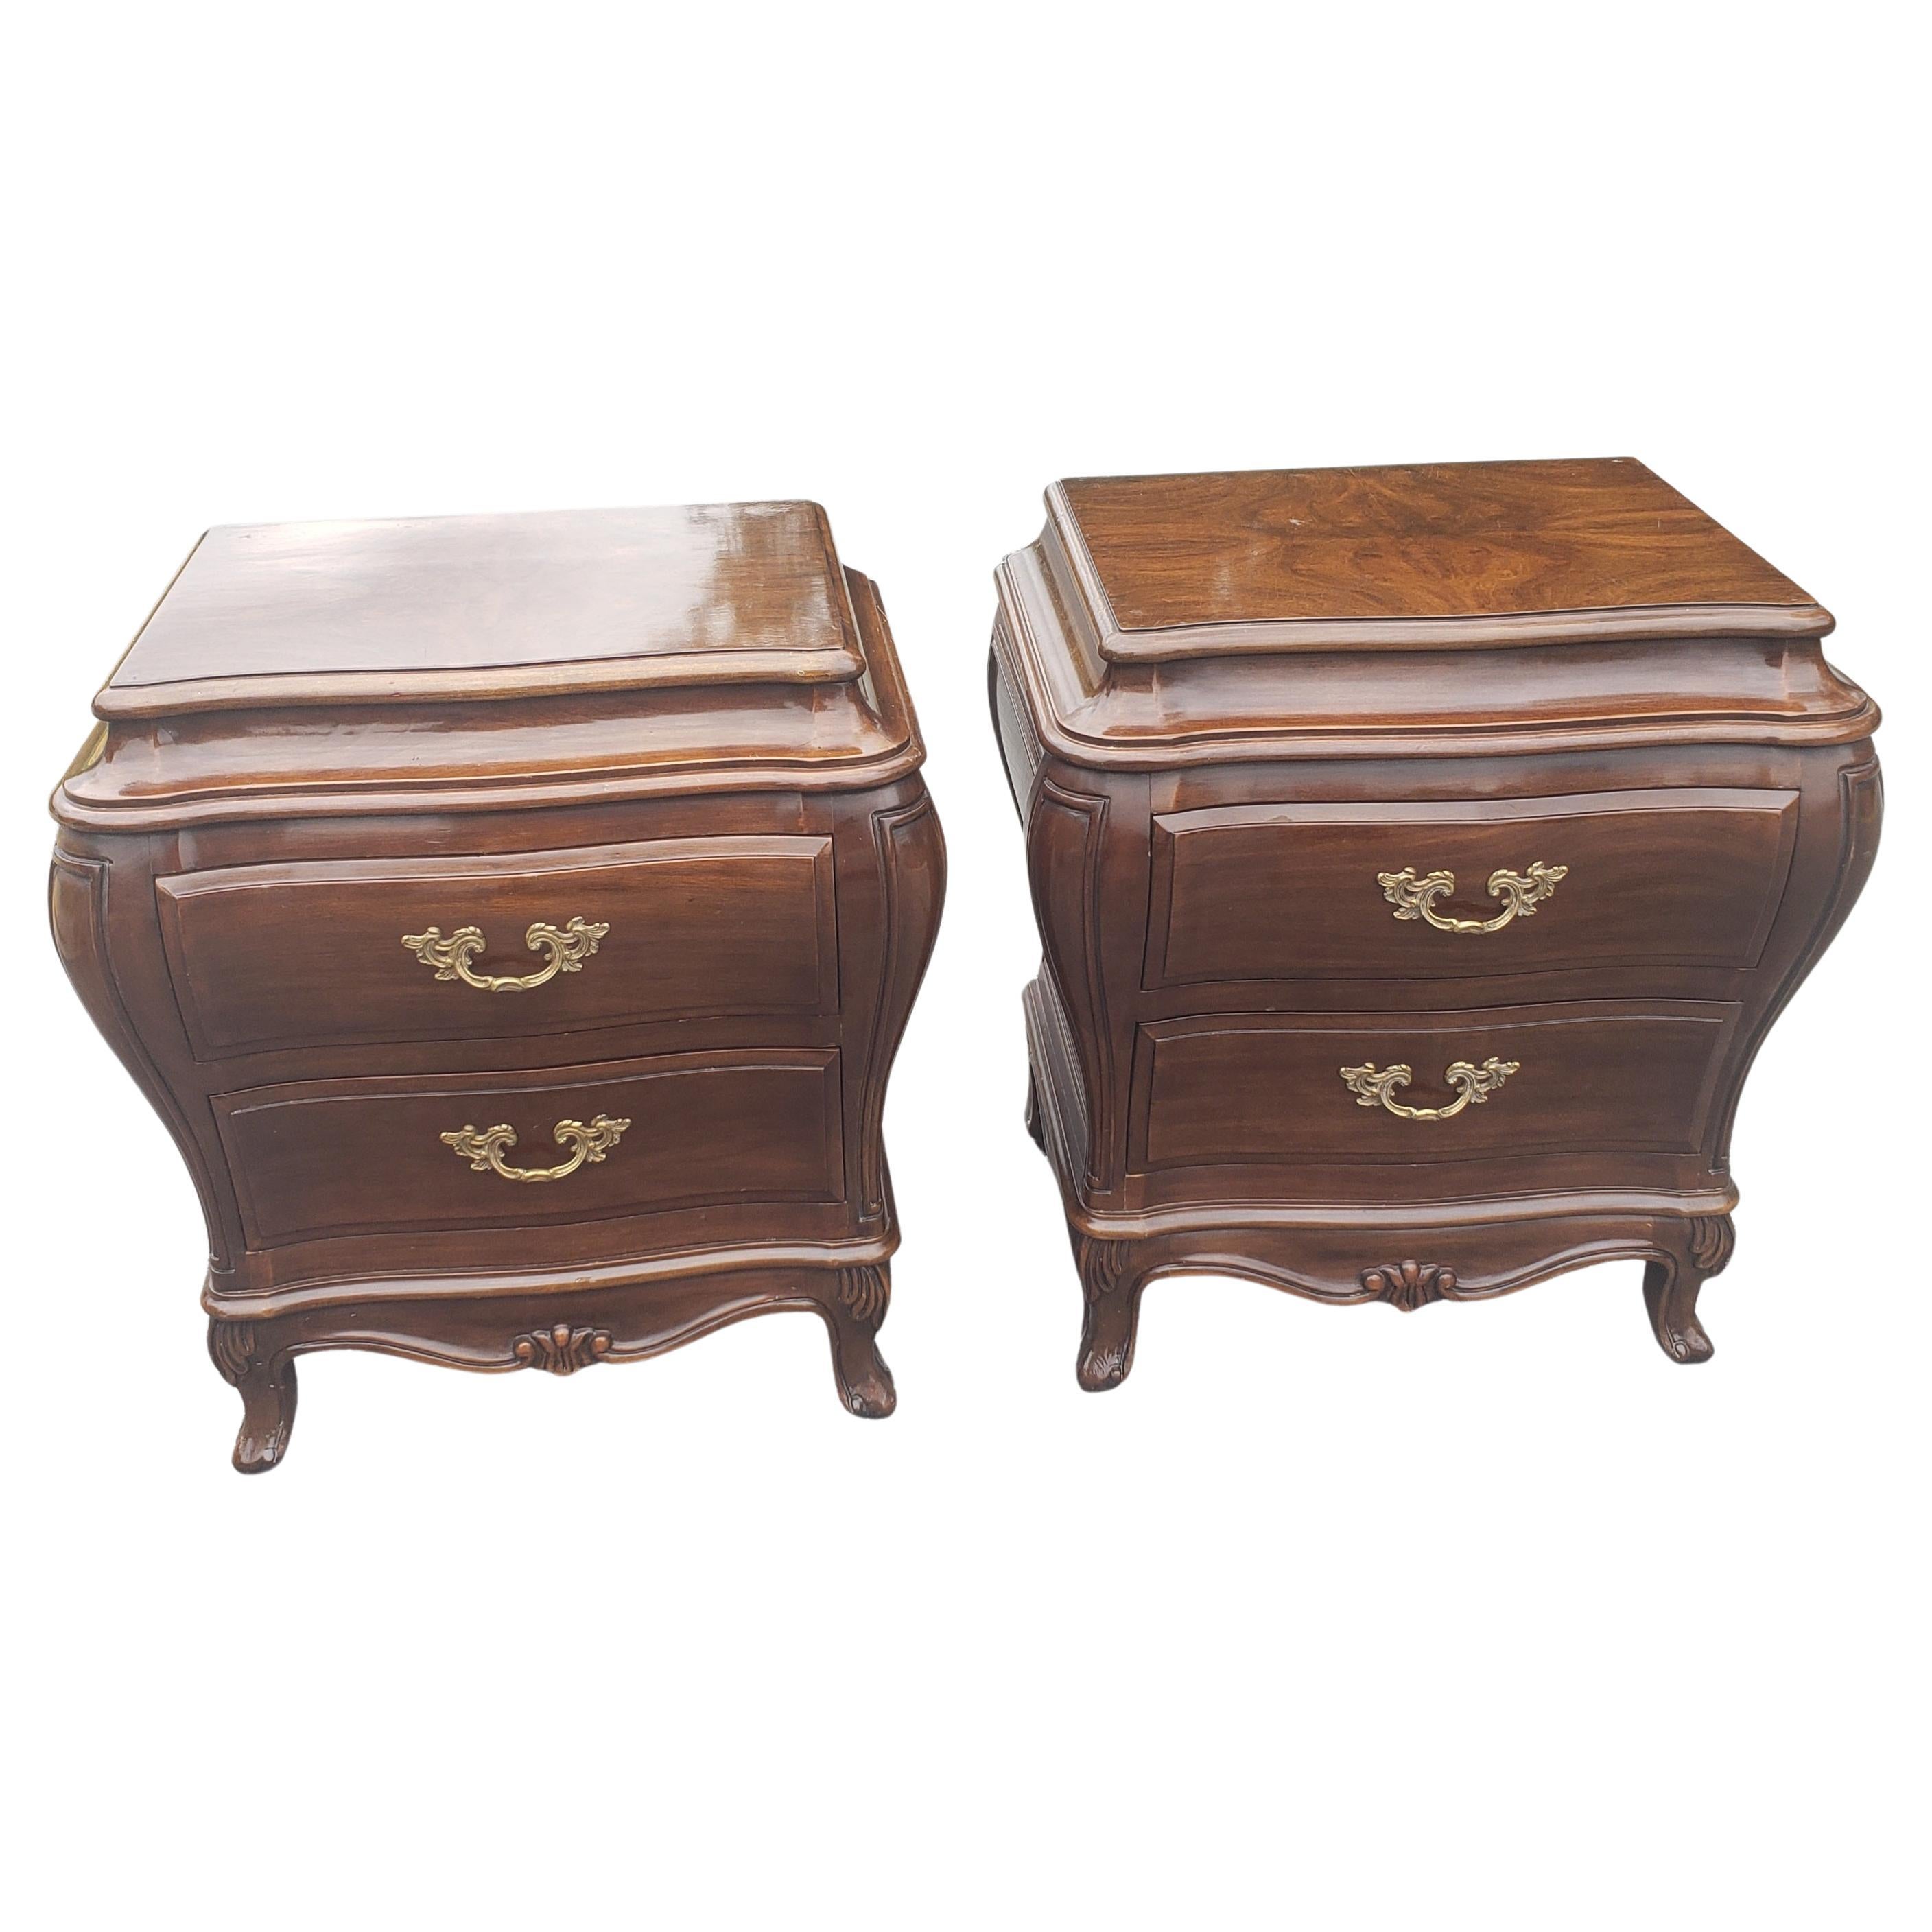 A magnificent pair of Karges Furniture Louis XVI mahogany bombe nightstands commodes with protective glass top.
Very good vintage condition. Measures 25